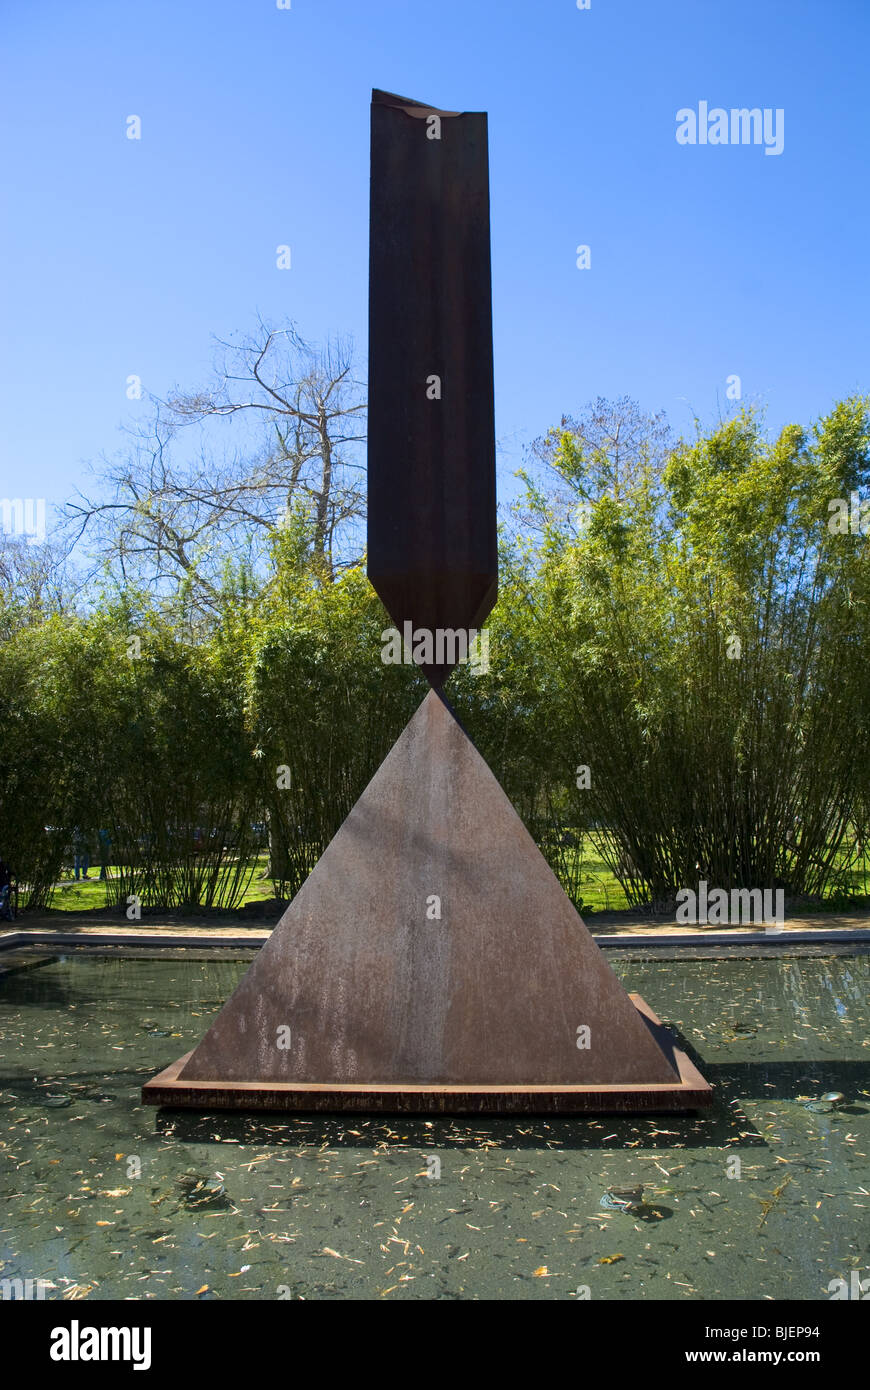 Metal Sculpture by Barnett Newman at the Menil Museum in Houston, Texas  Stock Photo - Alamy